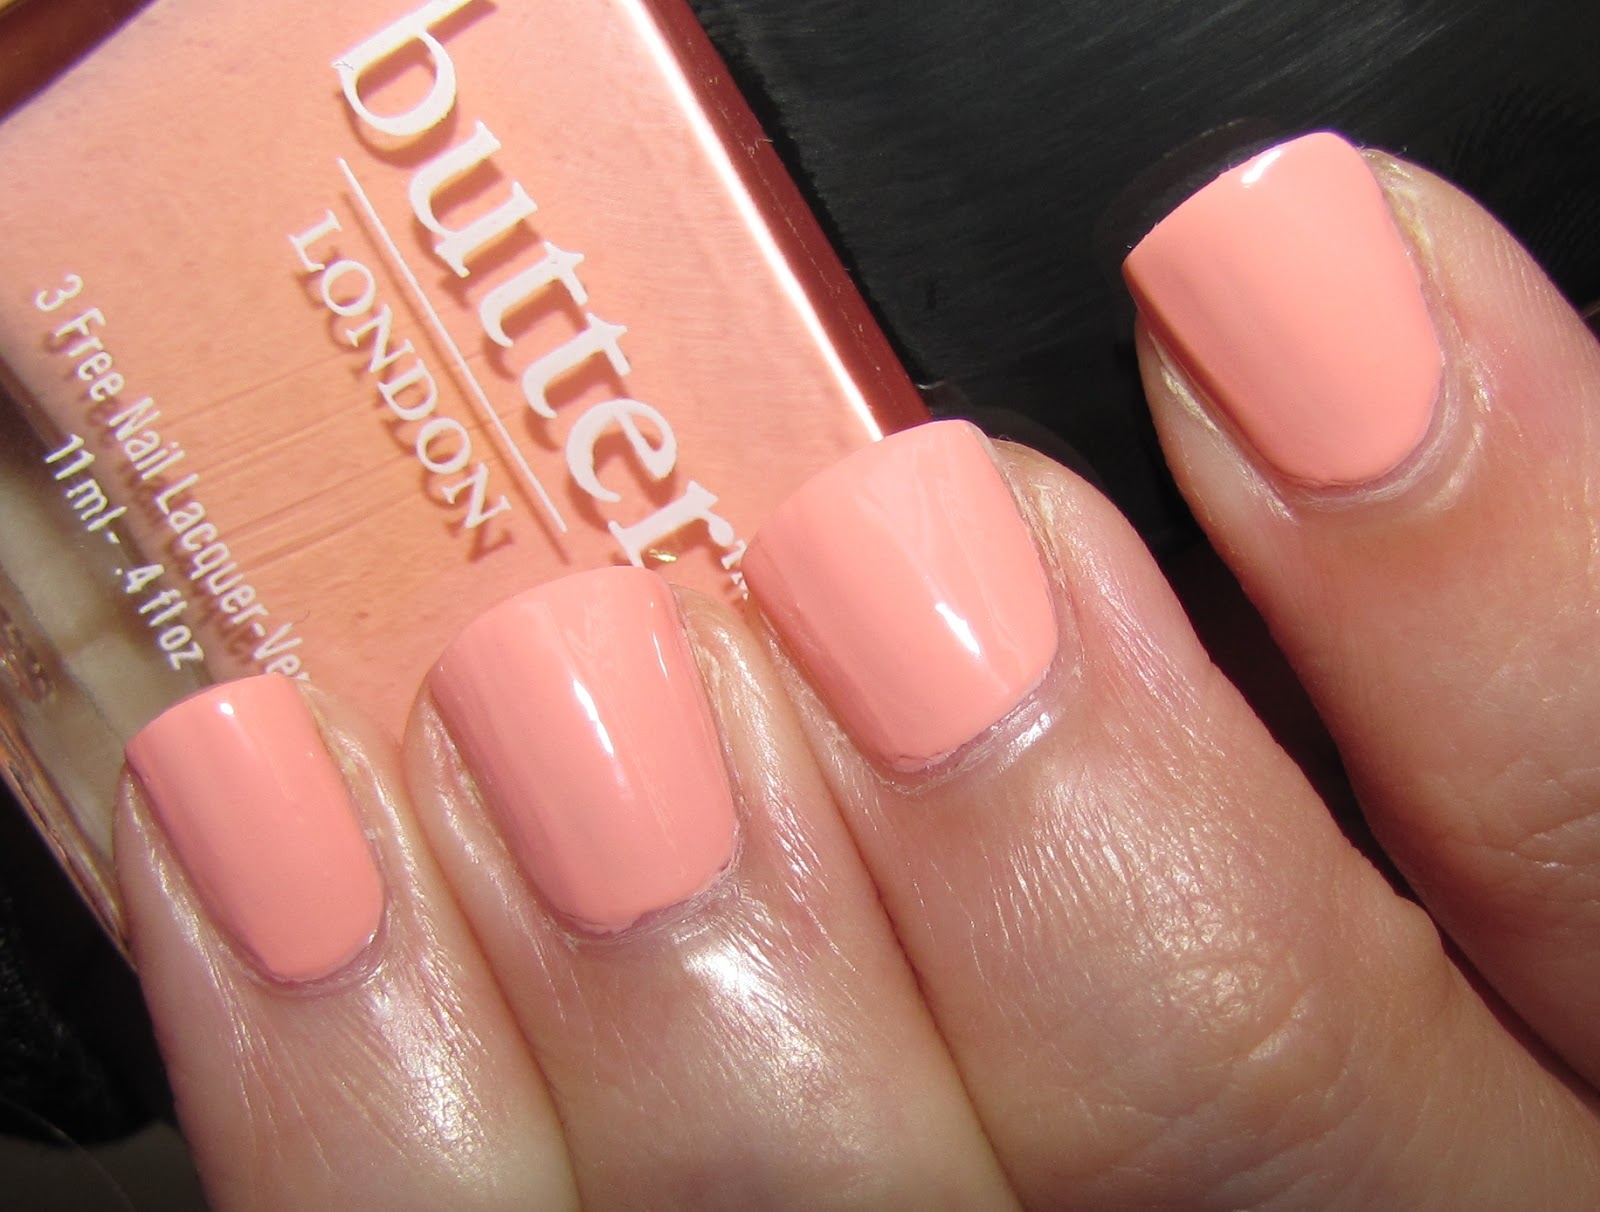 7. Butter London Nail Lacquer in Fiver - wide 4